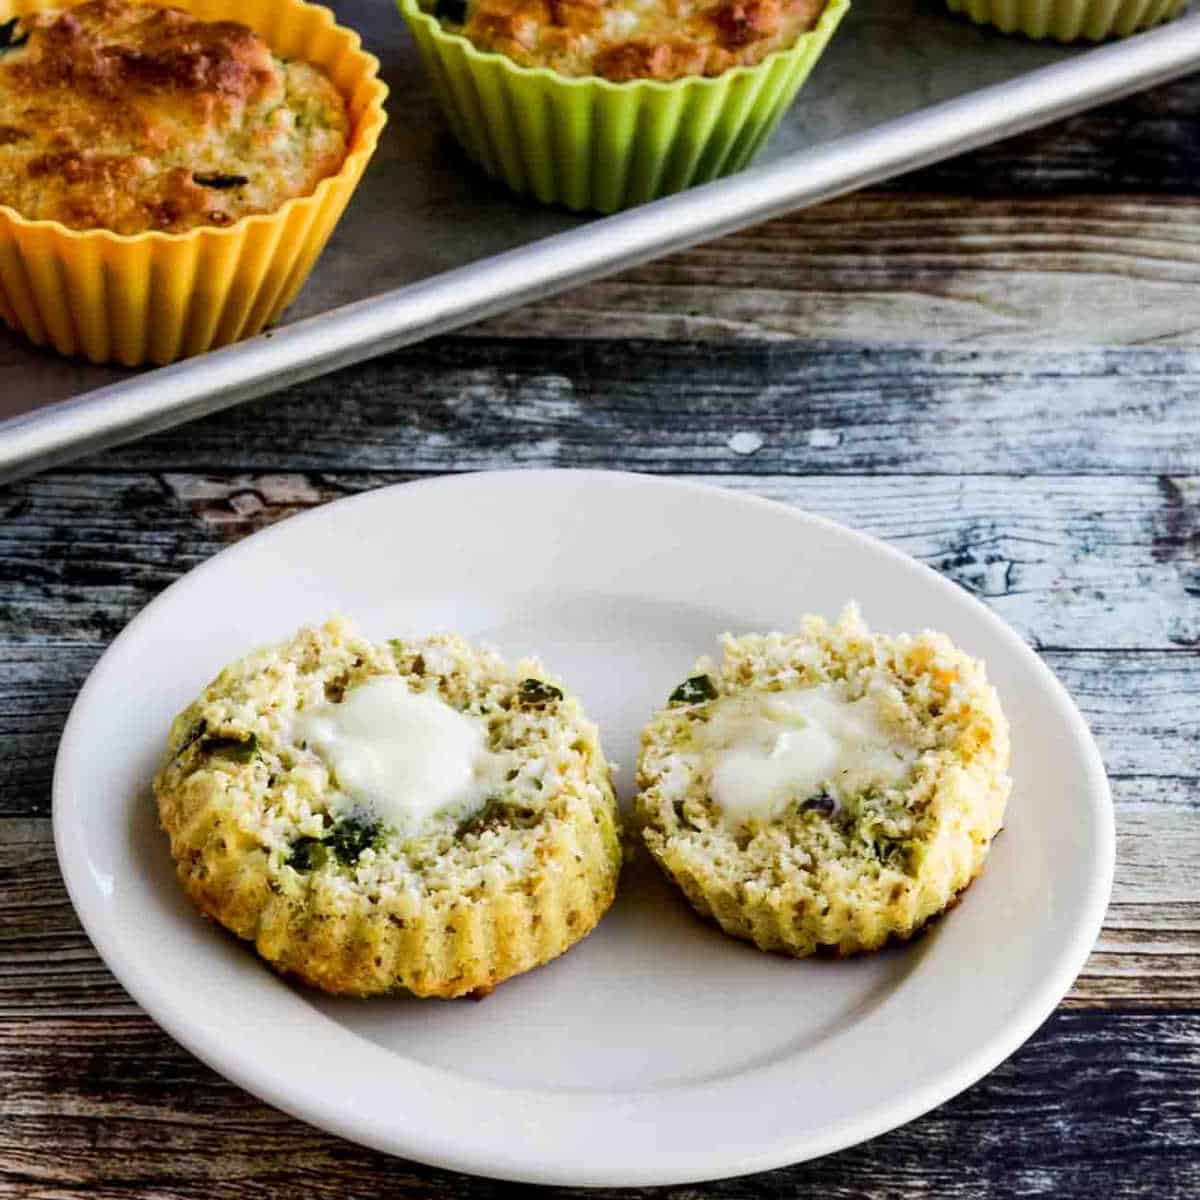 Flourless Breakfast Muffins with Zucchini and Feta shown on serving plate with muffin cut in half with butter